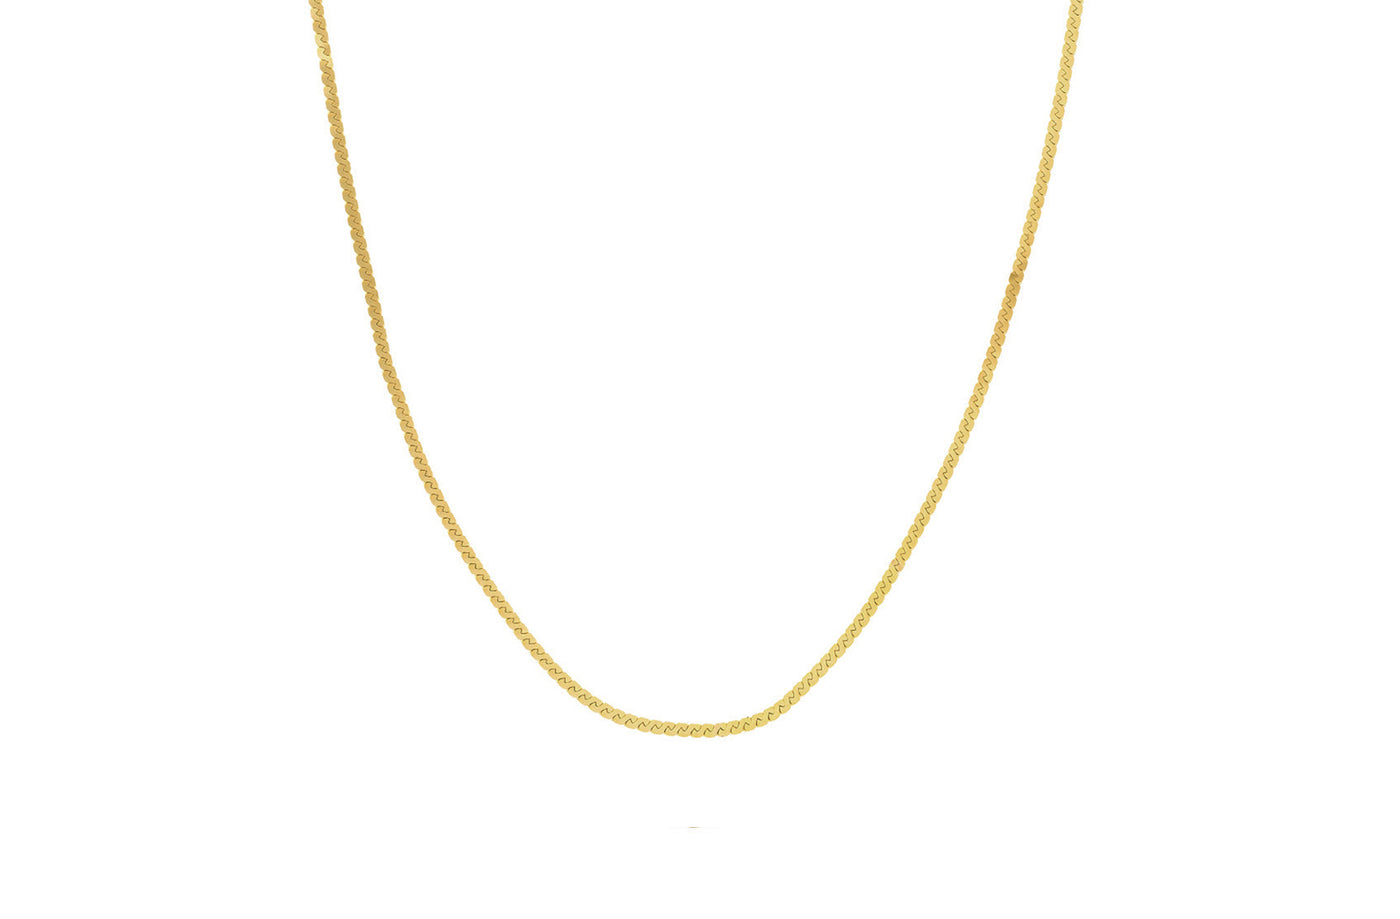 Serpentine Necklace in Yellow Gold